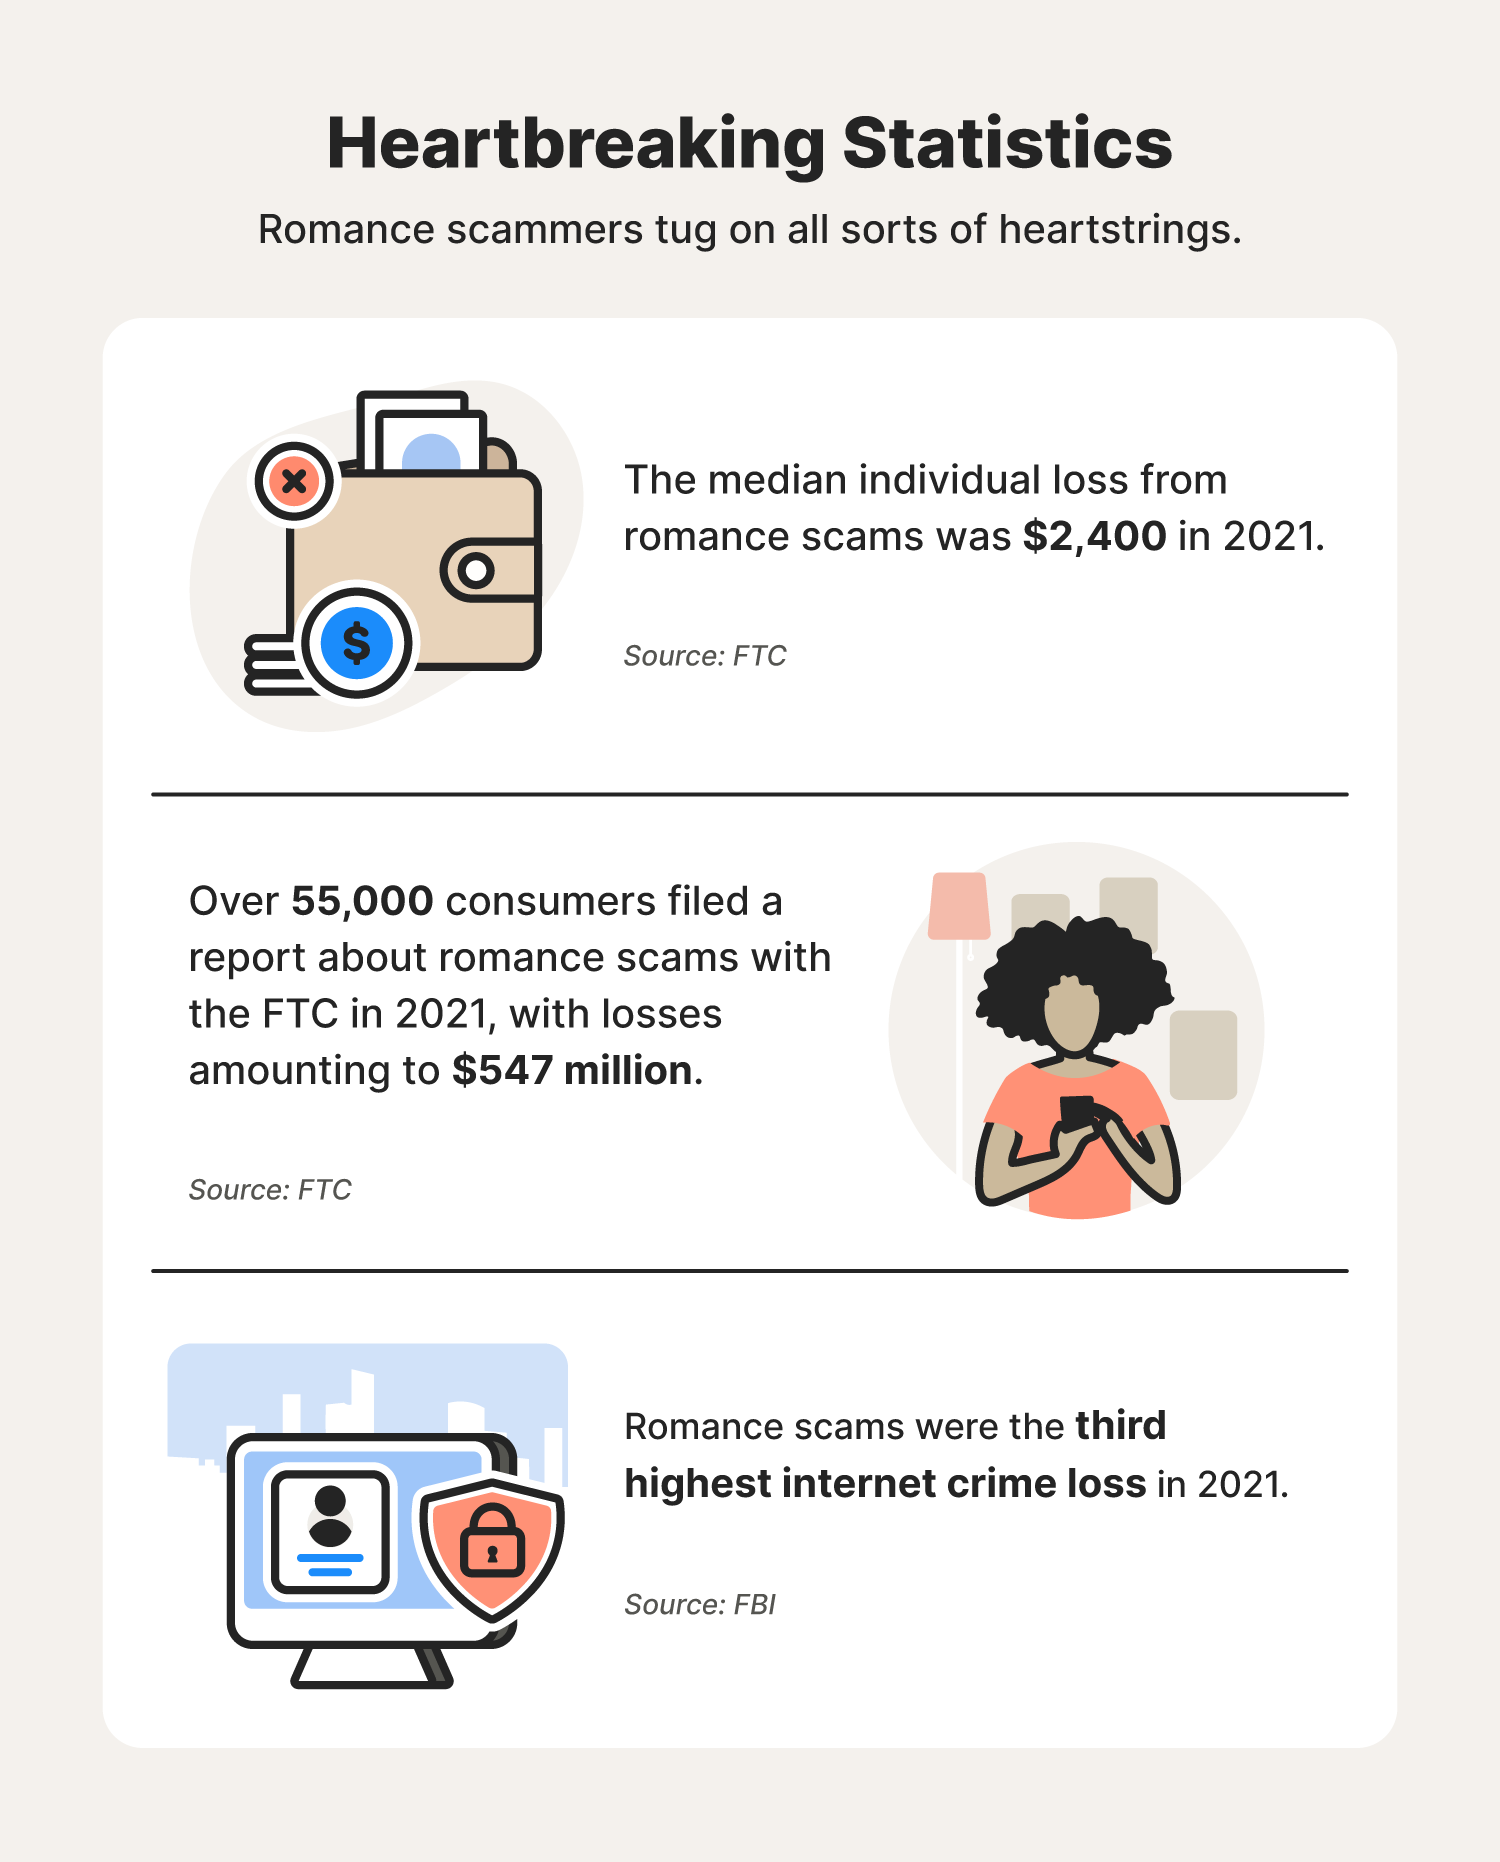 A graphic showcases the do’s and don’ts of online dating to help avoid romance scams.